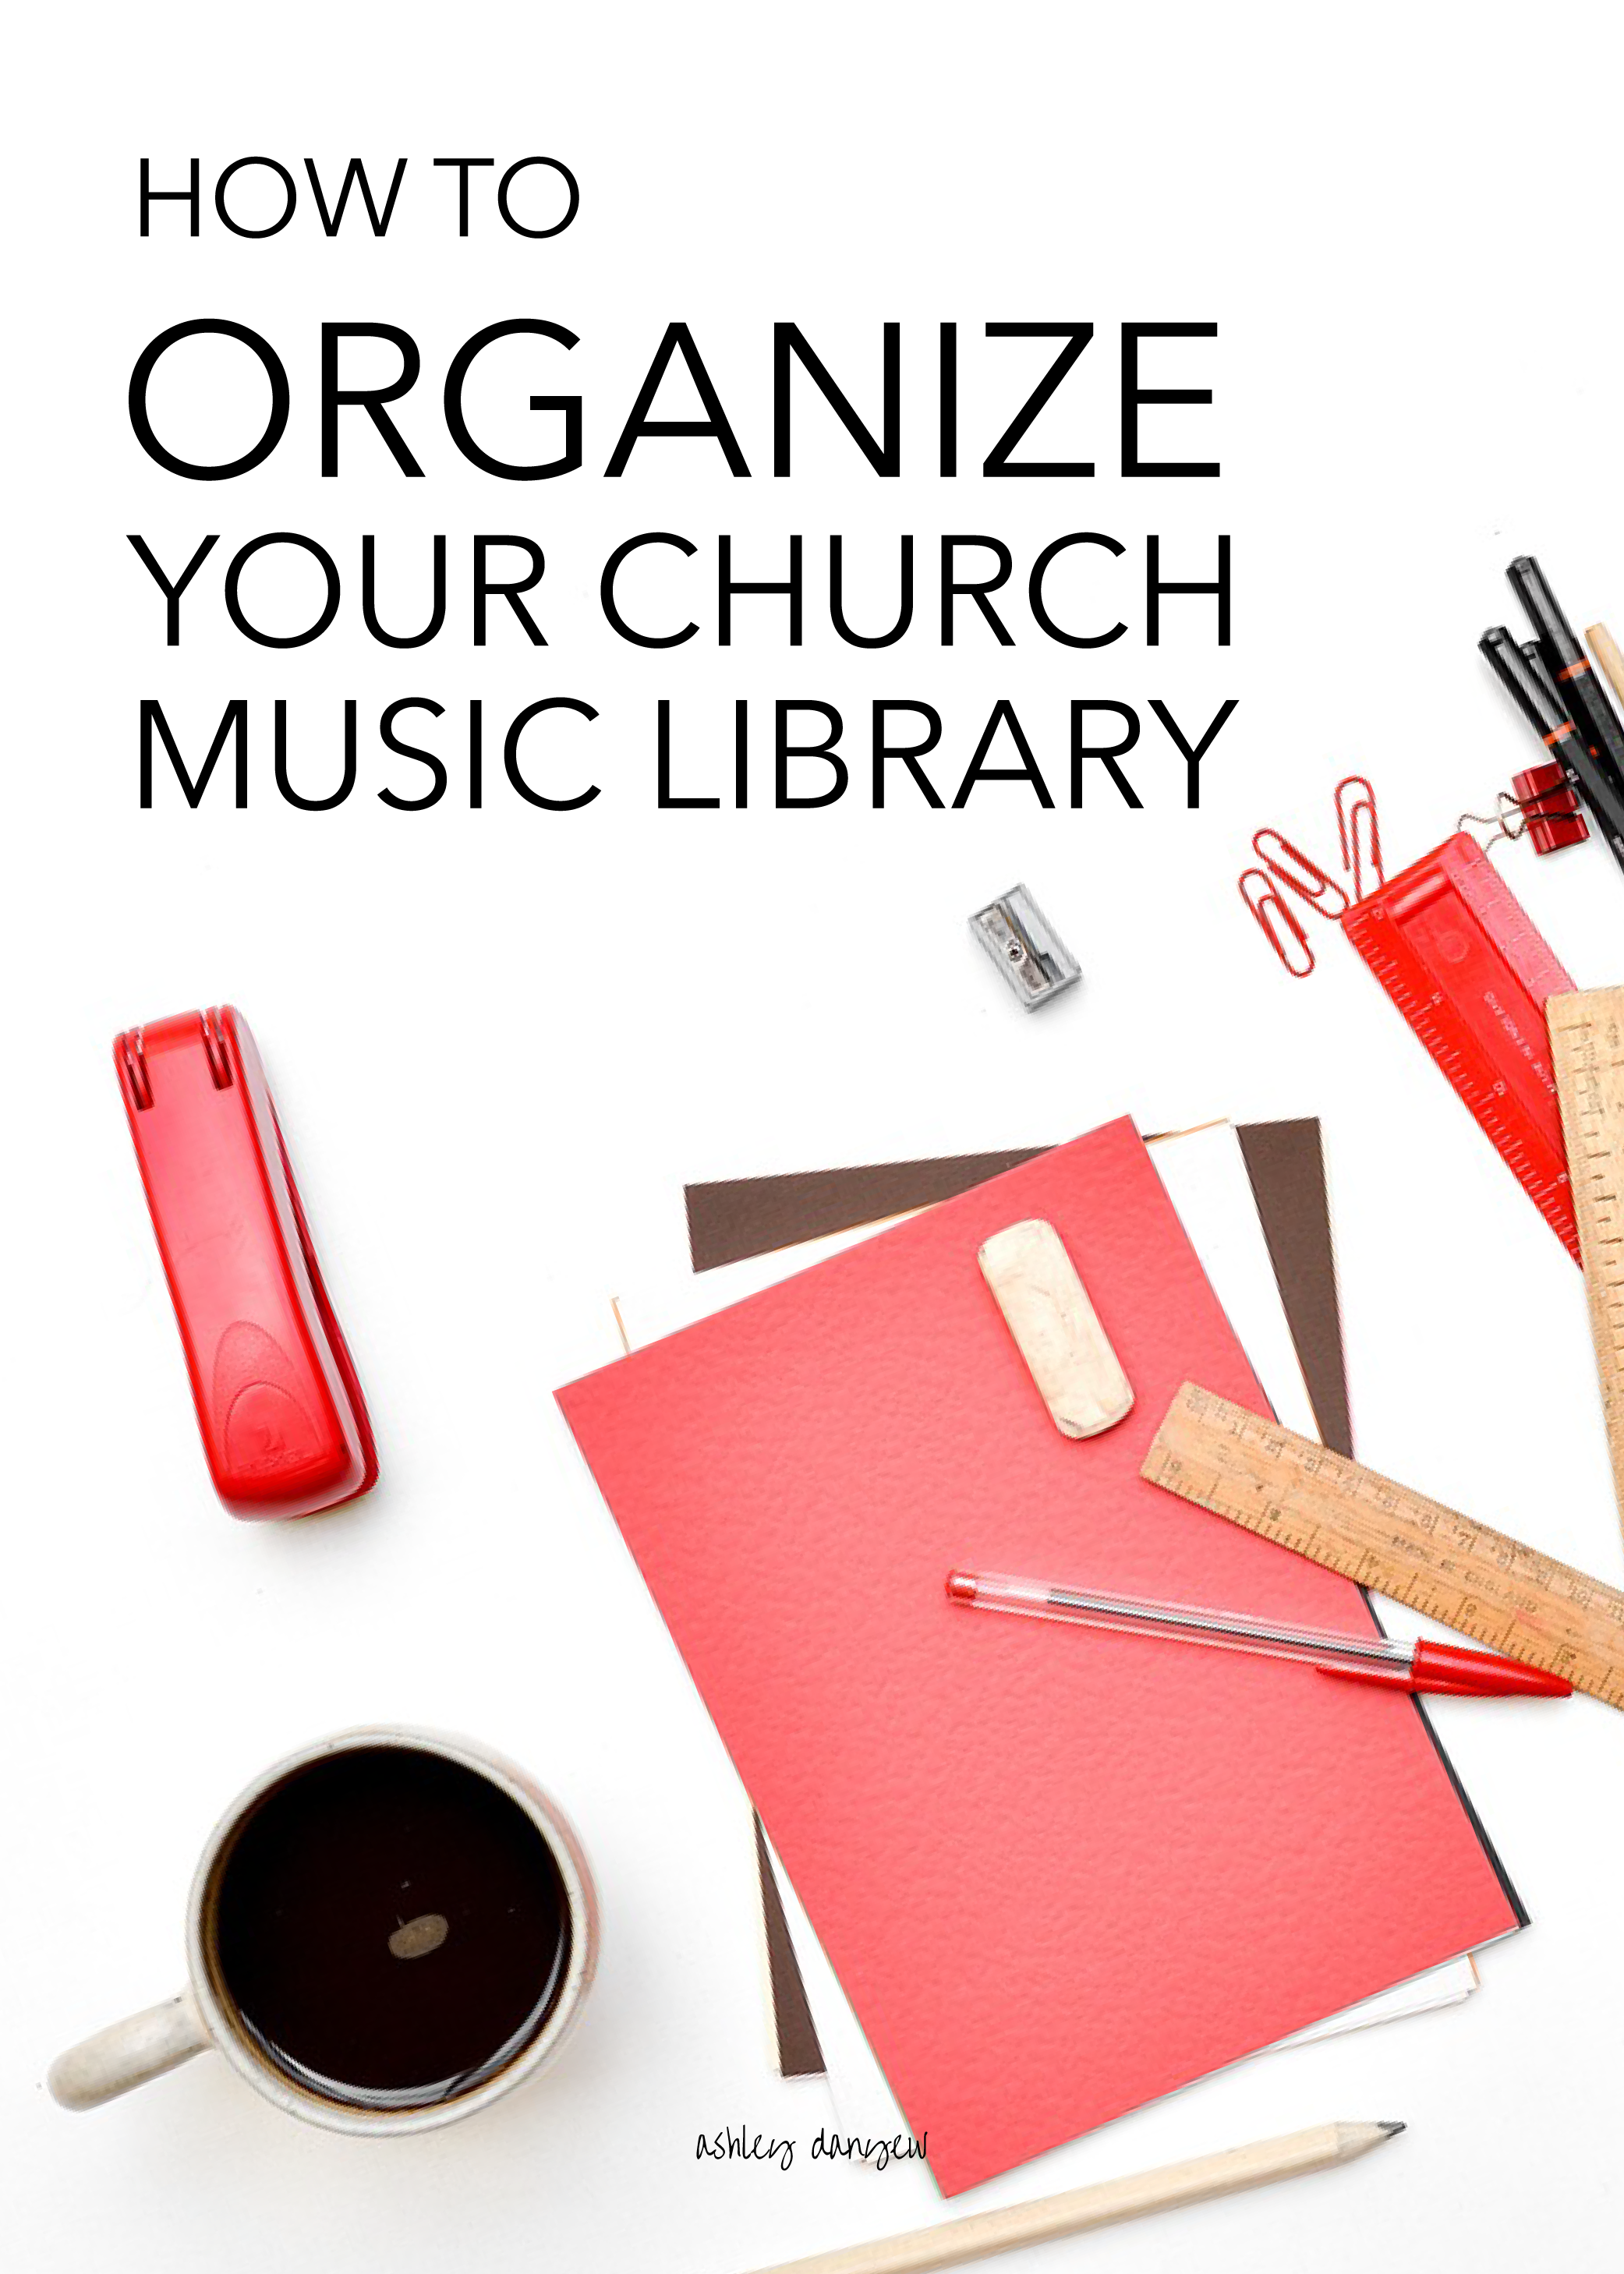 Copy of How to Organize Your Church Music Library